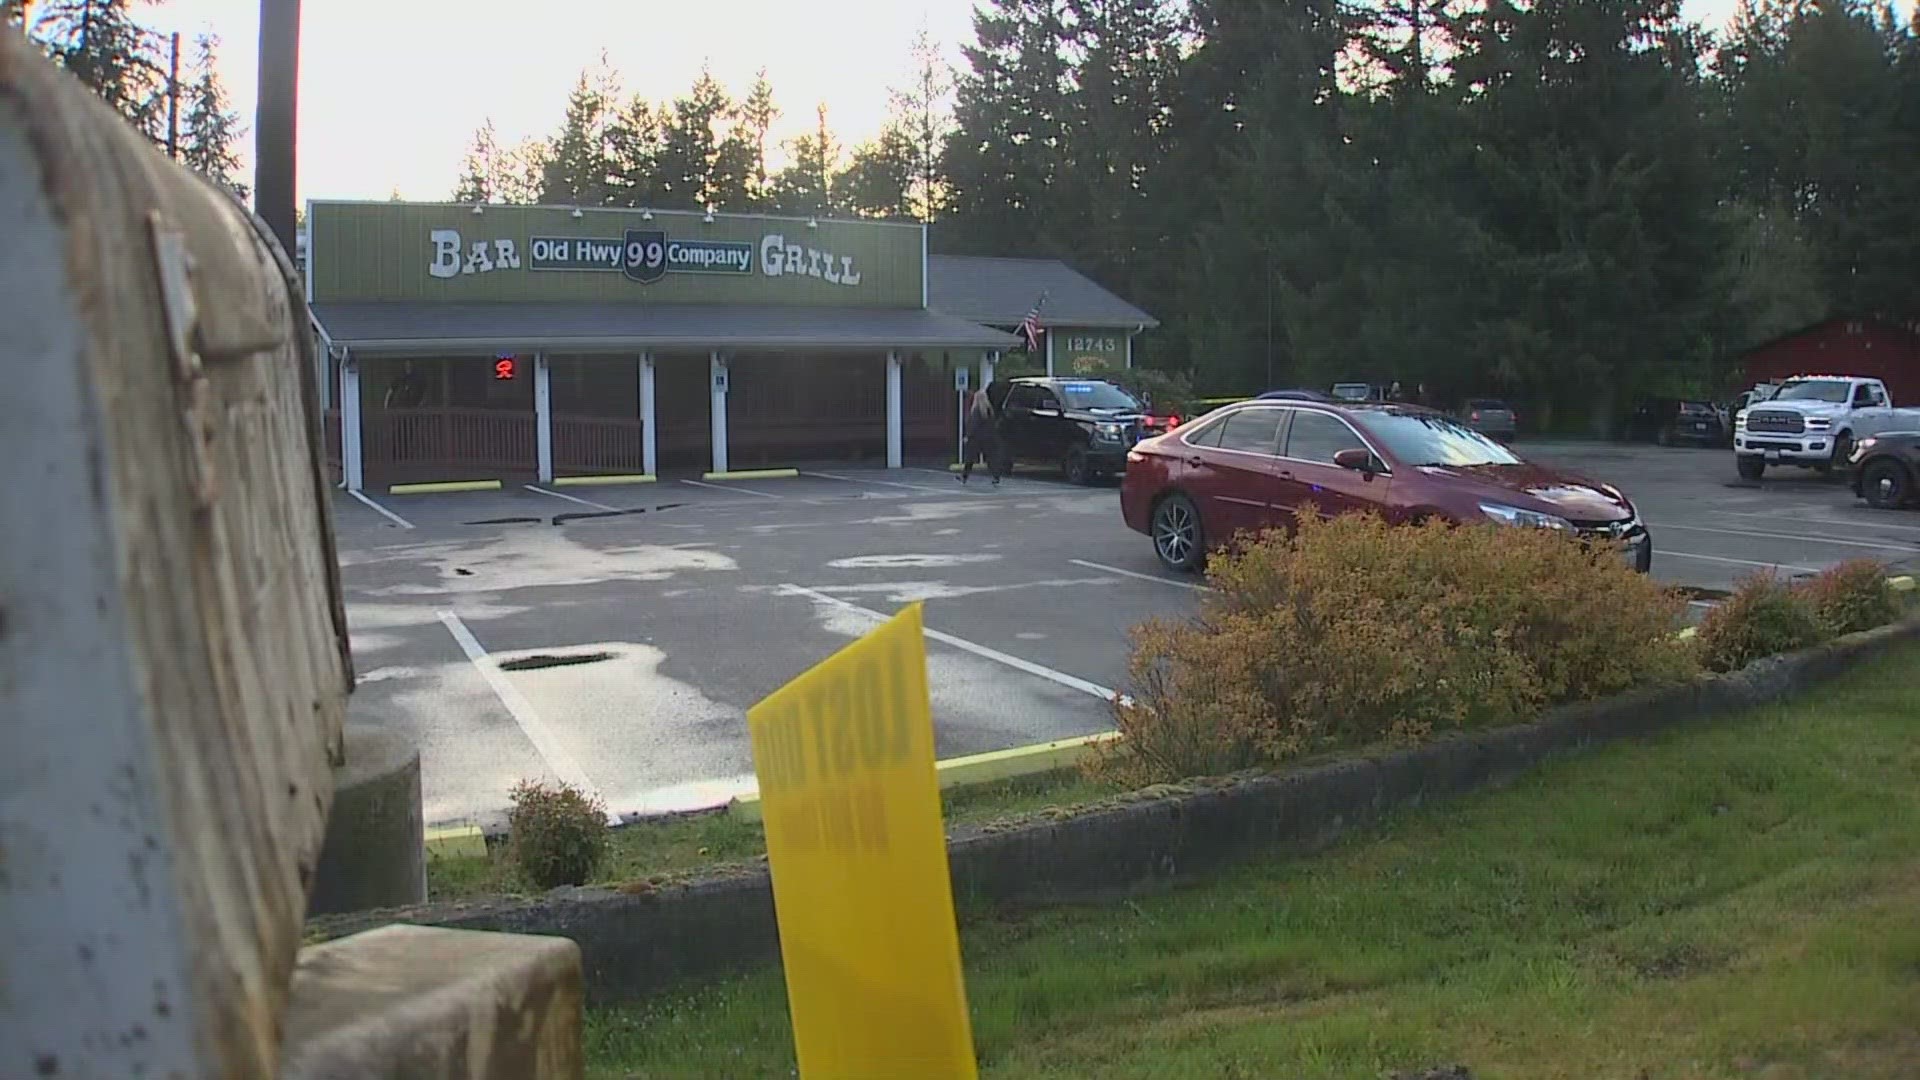 The shooting occurred on Tuesday evening at the Old Hwy 99 Company Bar and Grill.